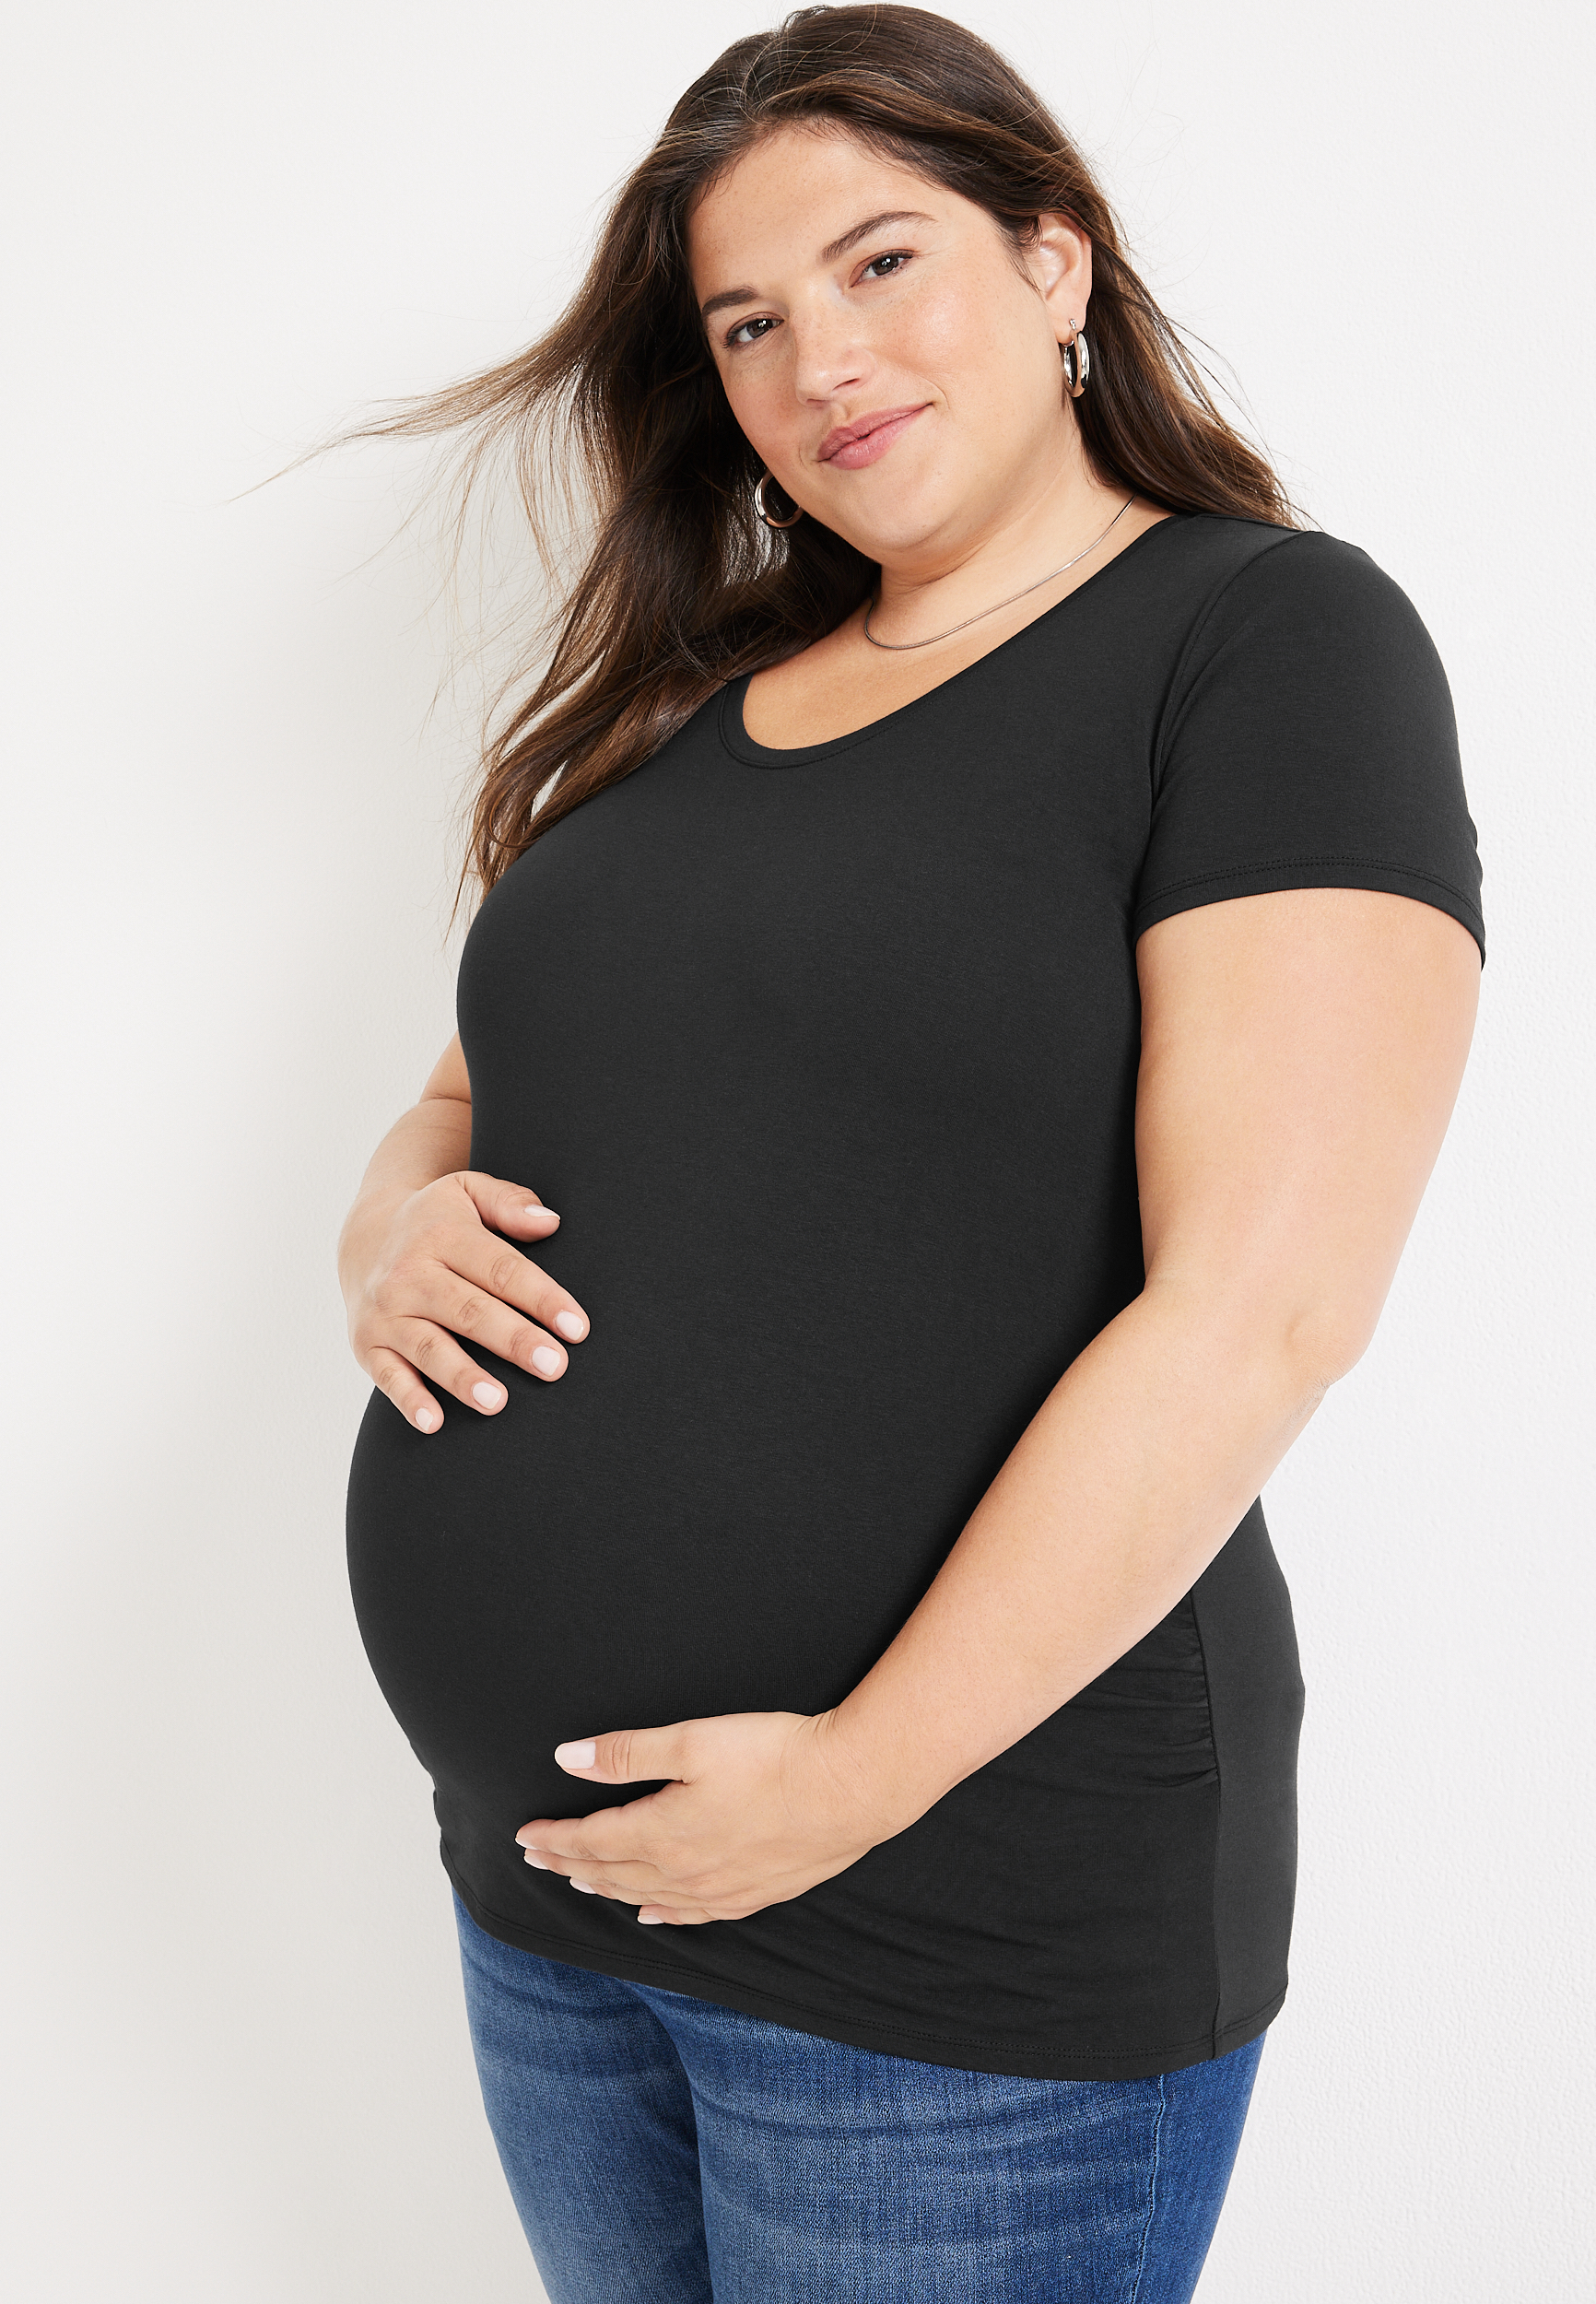 Plus Size Maternity Clothing - Page 3 of 4 - plussize-outfits.com